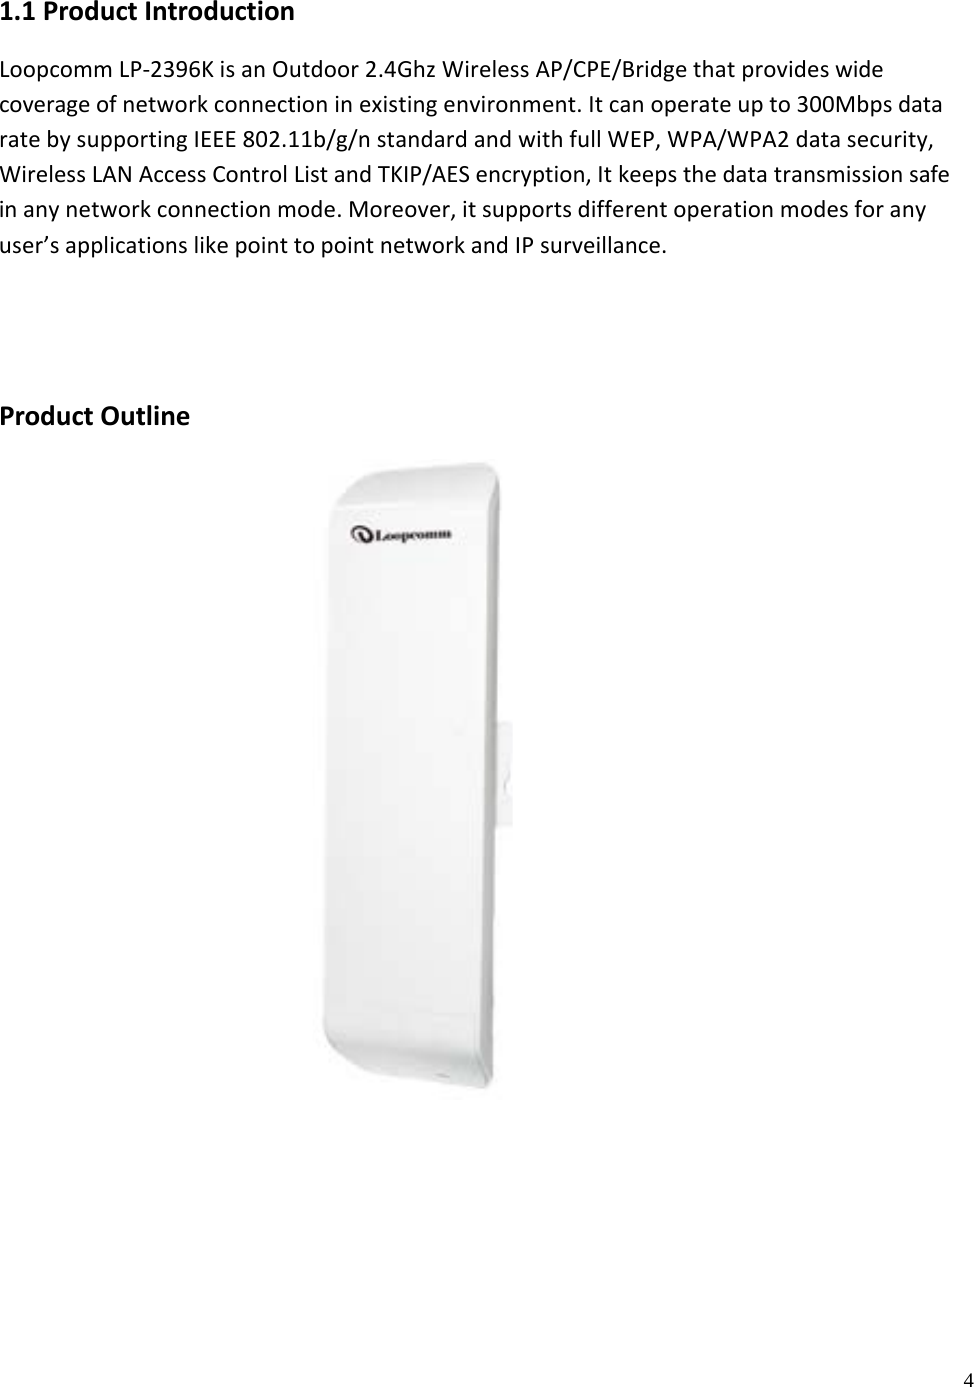 4 1.1 Product Introduction Loopcomm LP-2396K is an Outdoor 2.4Ghz Wireless AP/CPE/Bridge that provides wide coverage of network connection in existing environment. It can operate up to 300Mbps data rate by supporting IEEE 802.11b/g/n standard and with full WEP, WPA/WPA2 data security, Wireless LAN Access Control List and TKIP/AES encryption, It keeps the data transmission safe in any network connection mode. Moreover, it supports different operation modes for any user’s applications like point to point network and IP surveillance. Product Outline 